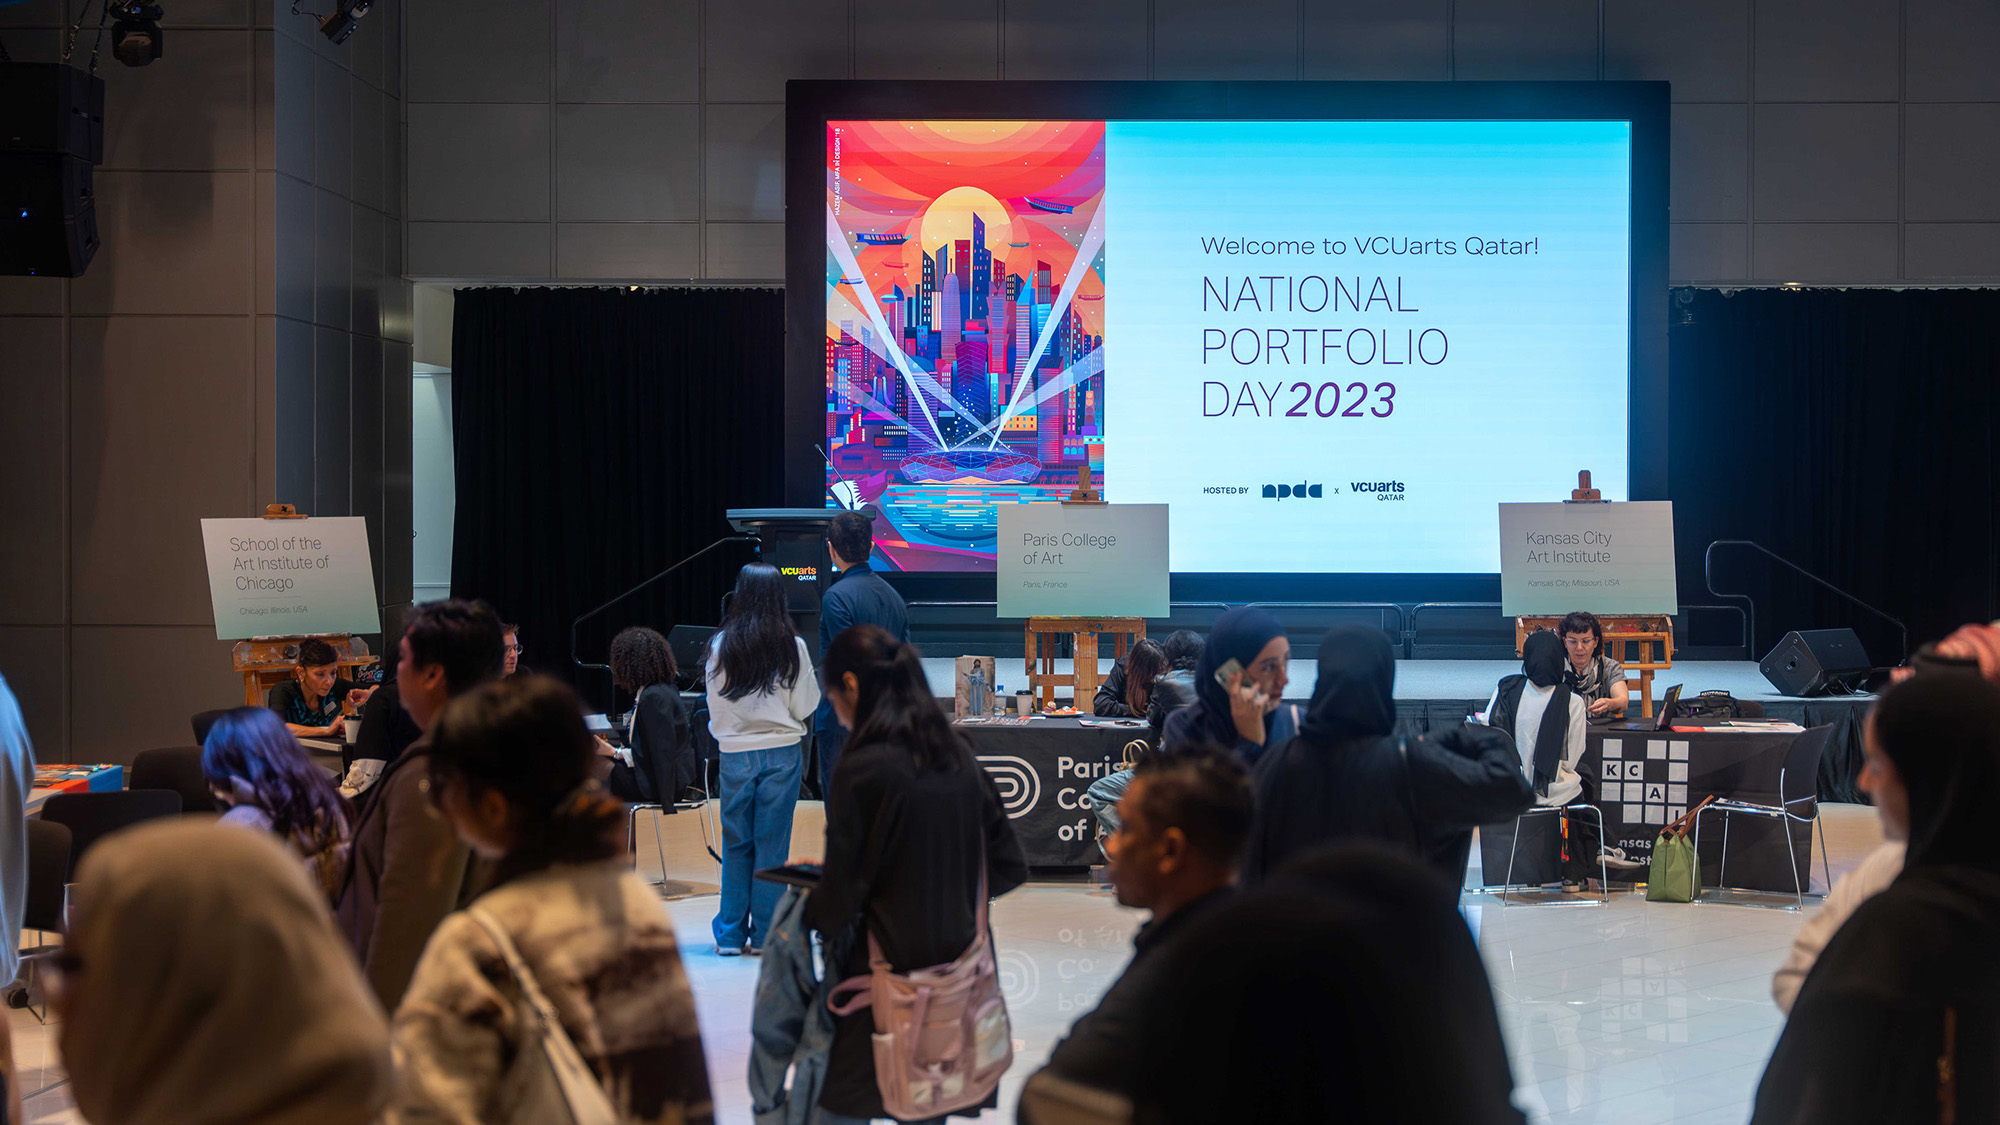 the National Portfolio Day event at the Atrium with the attendees in the foreground and the National Portfolio Day logo on the screen in the background